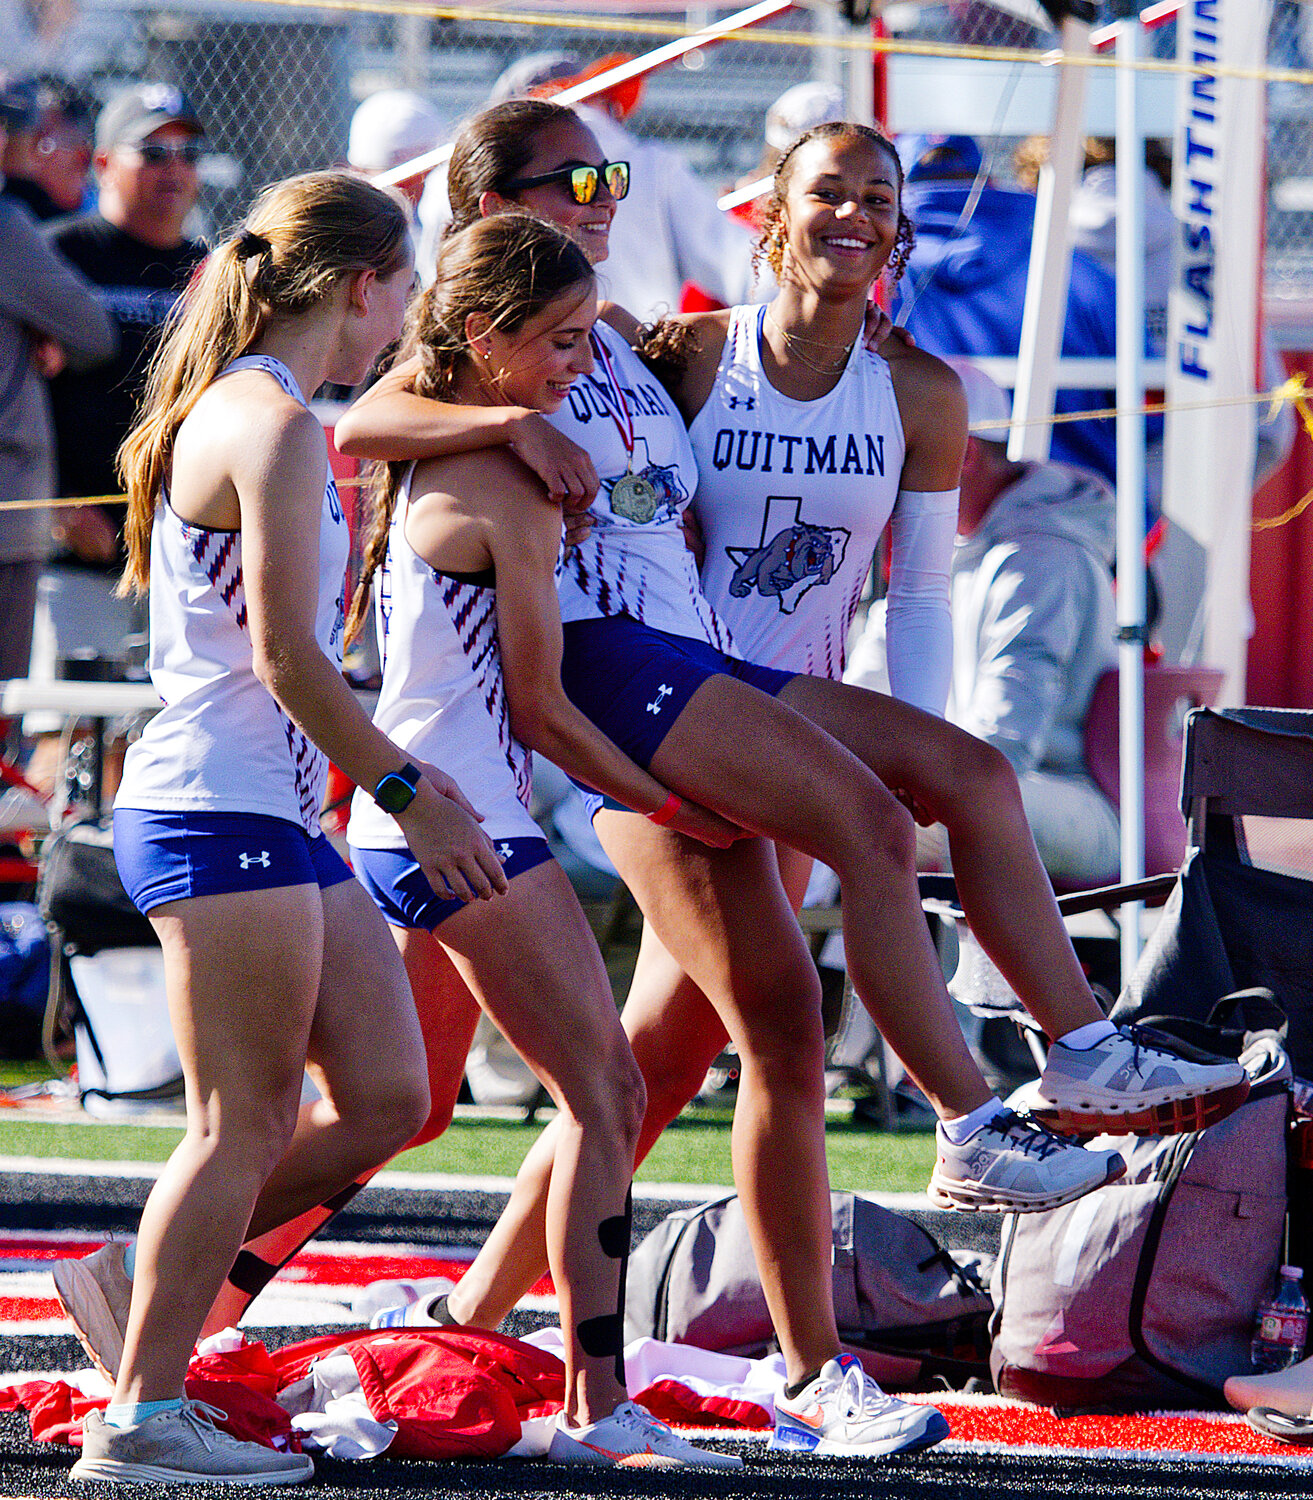 Katie Degorostiza gets an assist from her 4x400m relay teammates, after a long day of running, including  3200m and 1600m runs, both of which she won. [see more speed and strength on display]